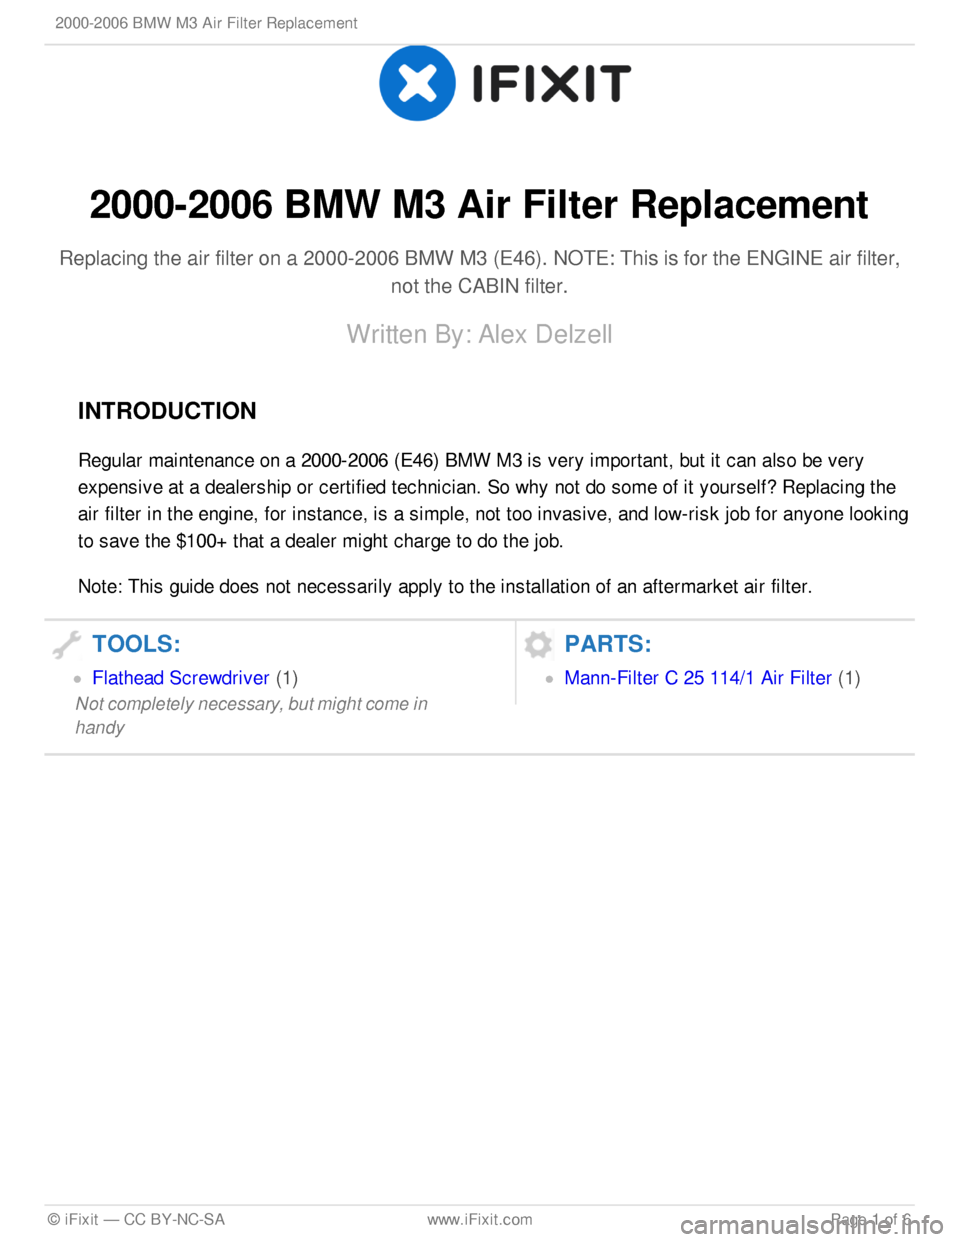 BMW M3 COUPE 2006 E46 Air Filter Replacement 2000-2 006 B M W  M 3 A ir  F ilt e r R ep la cem en t
Repla cin g th e a ir  filt e r o n a  2 000-2 006 B M W  M 3 ( E 46). N O TE : T his  is  fo r th e E N G IN E a ir  filt e r,
not th e C ABIN  